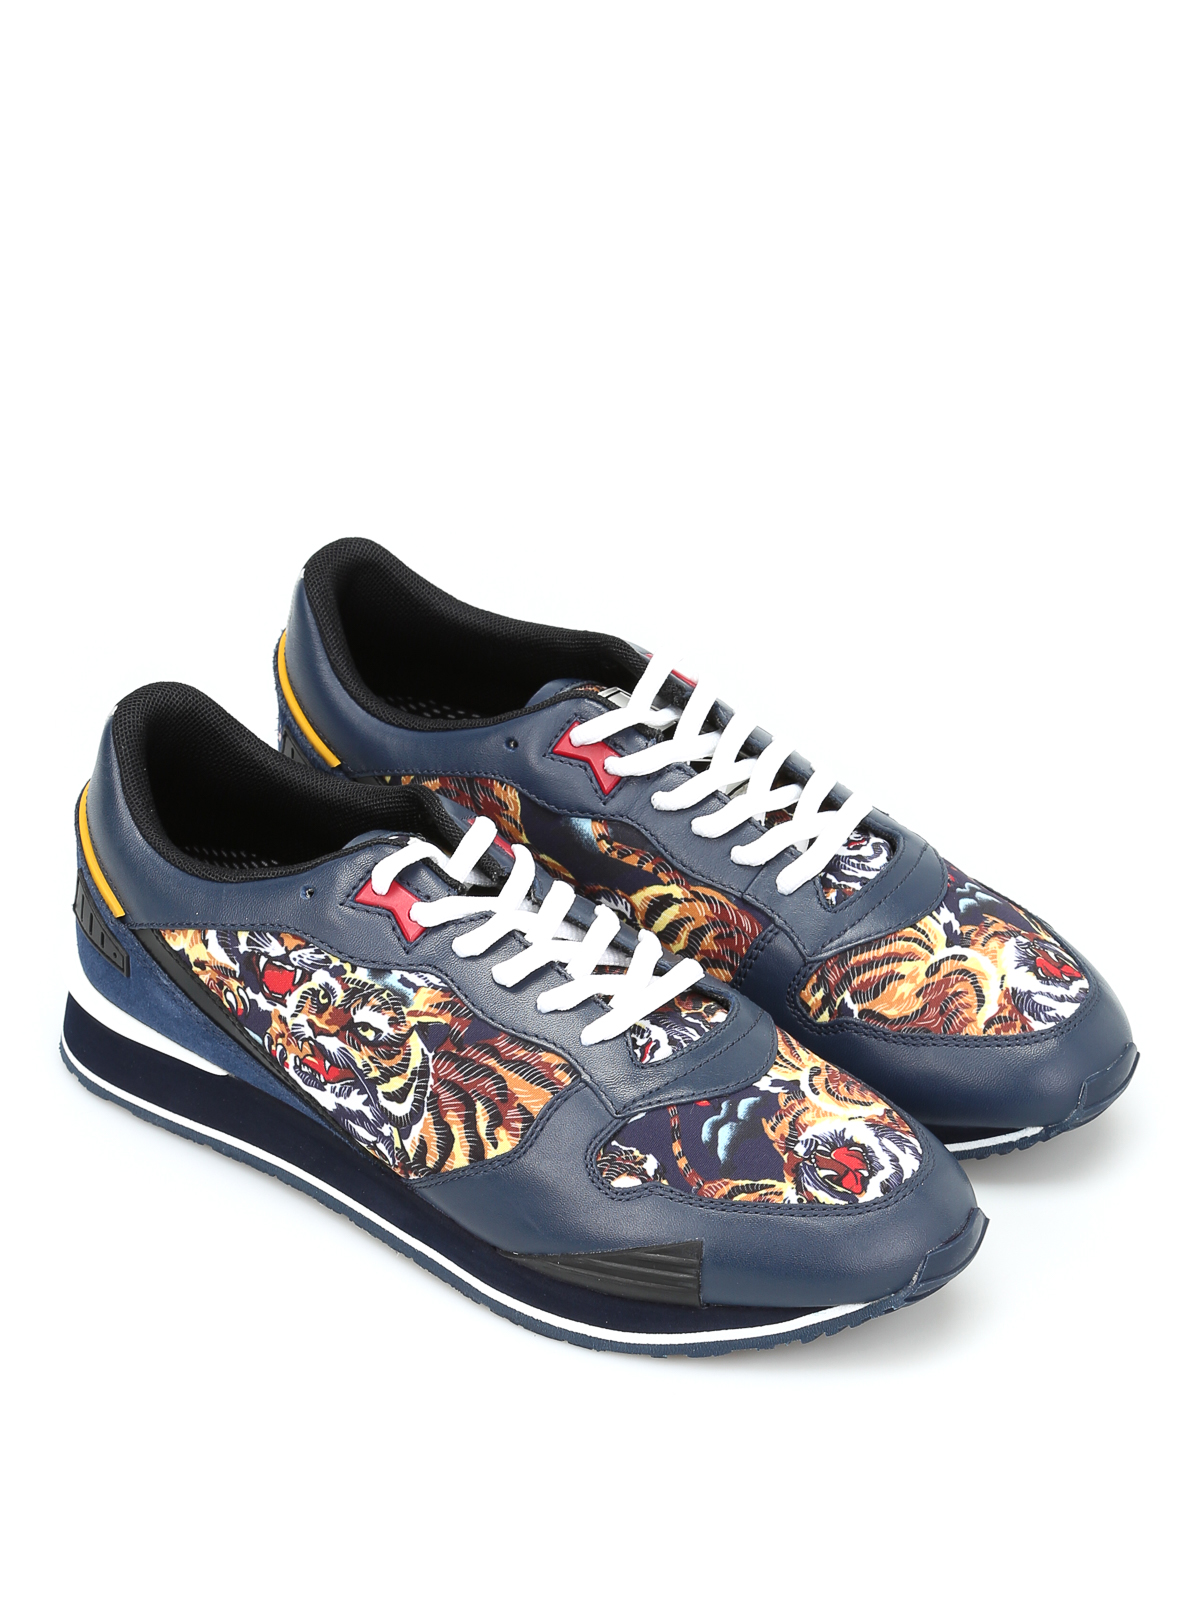 Trainers - Flying Tiger sneakers - M42465 | Shop online at iKRIX